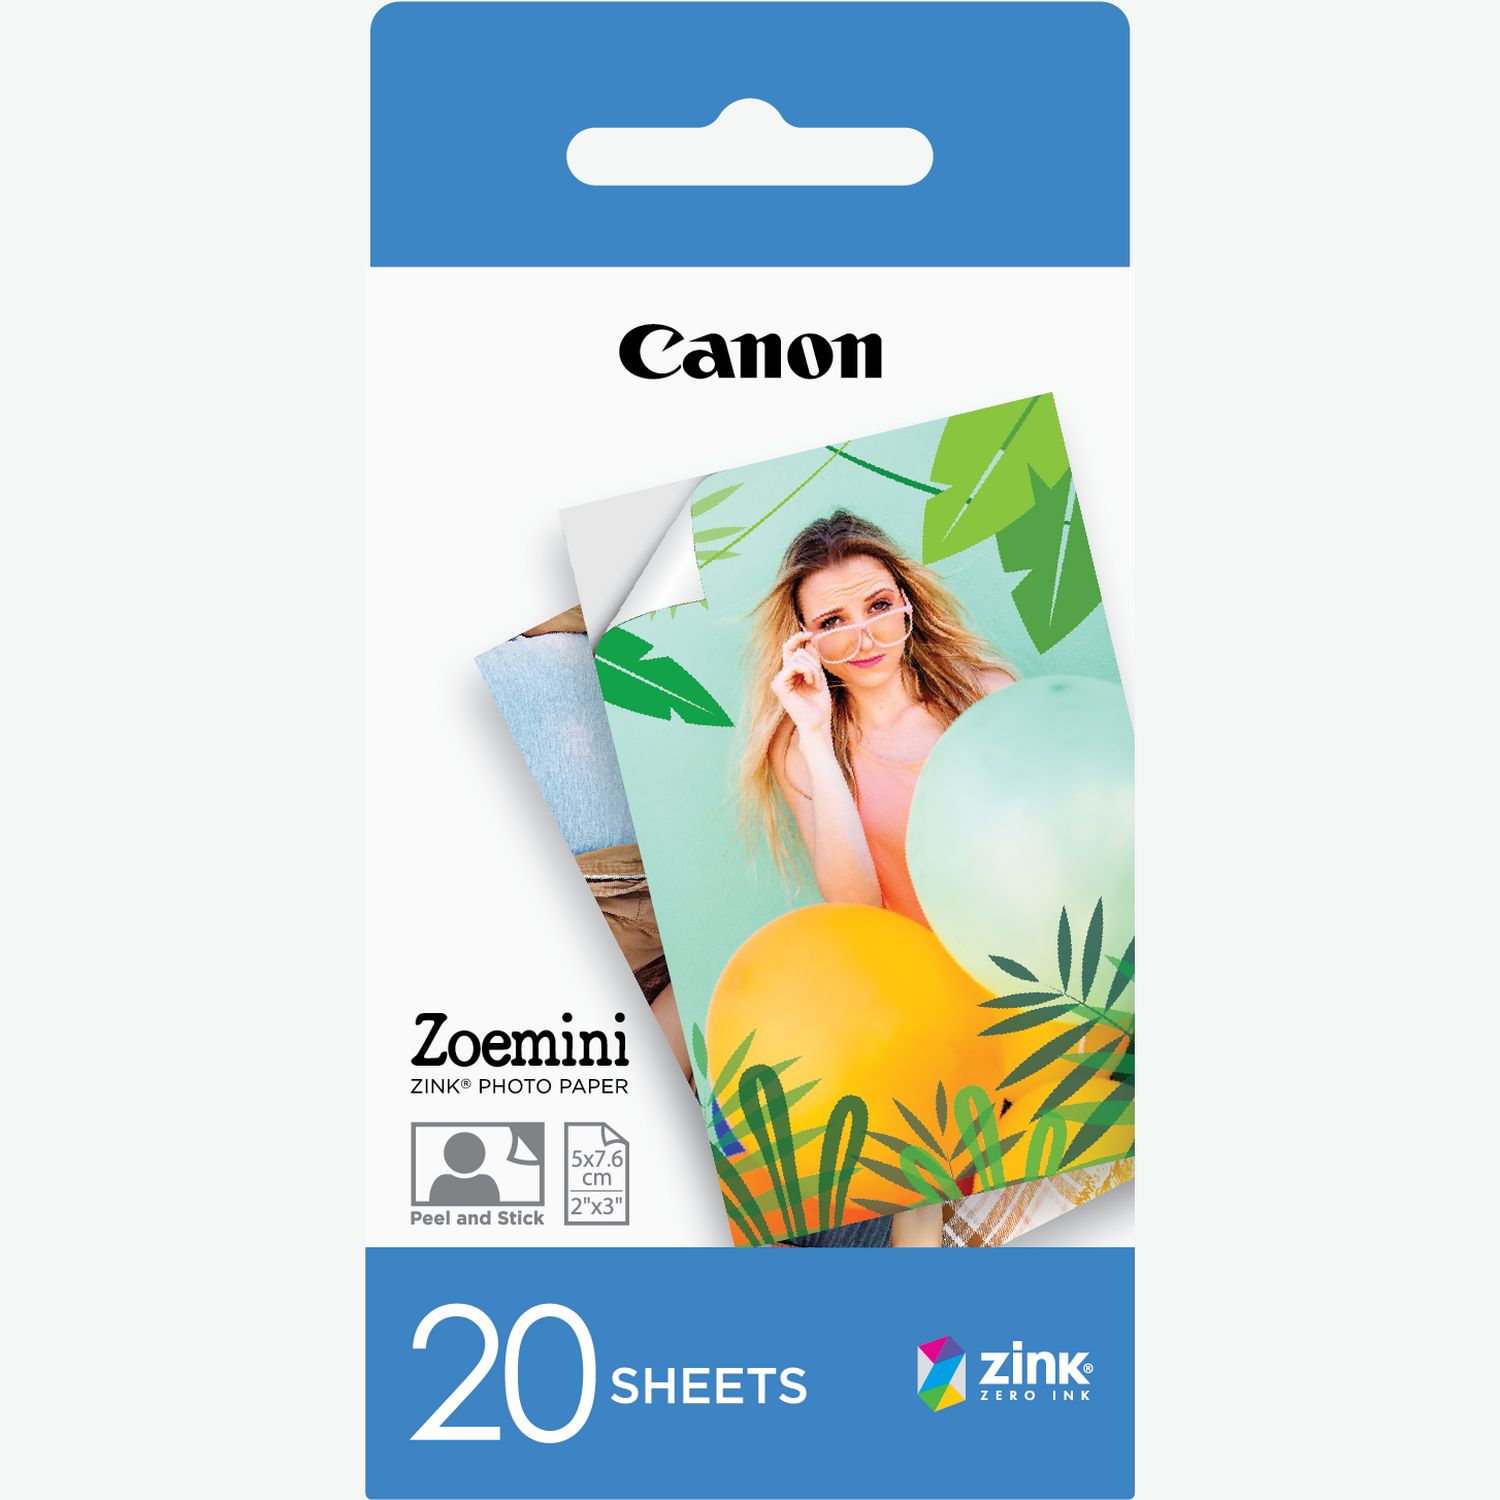 Canon Zoemini S2 Pocket Size 2-in-1 Instant Camera Printer With A